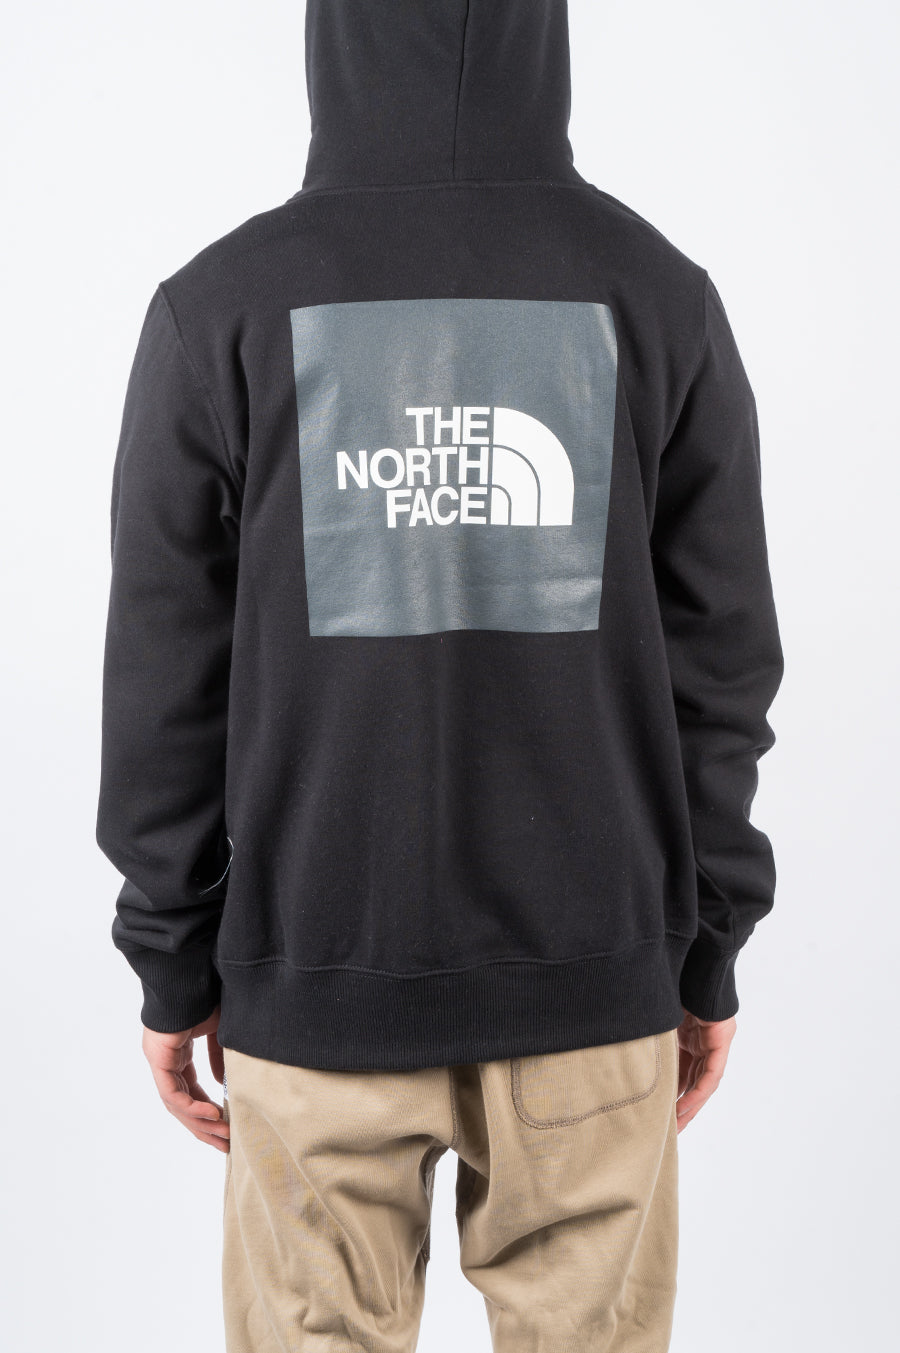 THE NORTH FACE 2.0 BOX PULLOVER HOODIE BLACK - BLENDS